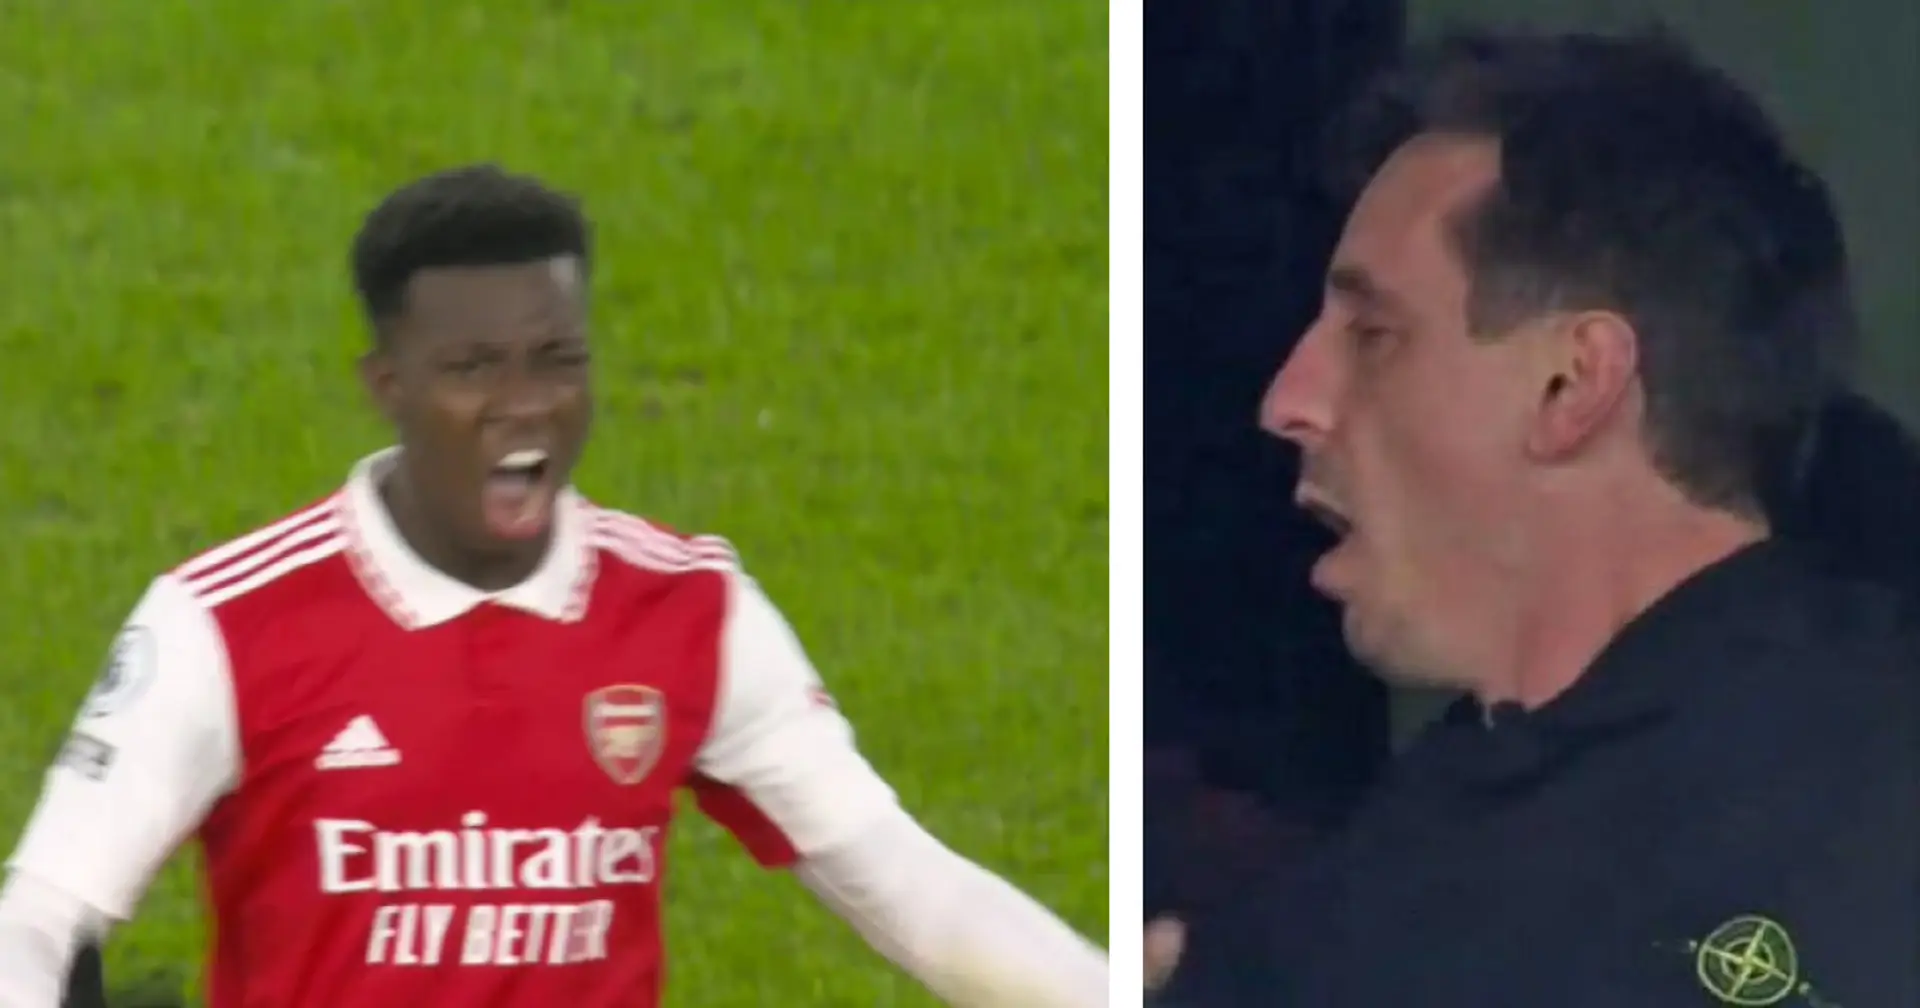 Spotted: Gary Neville's reaction after Nketiah sentences Man United to 0 points